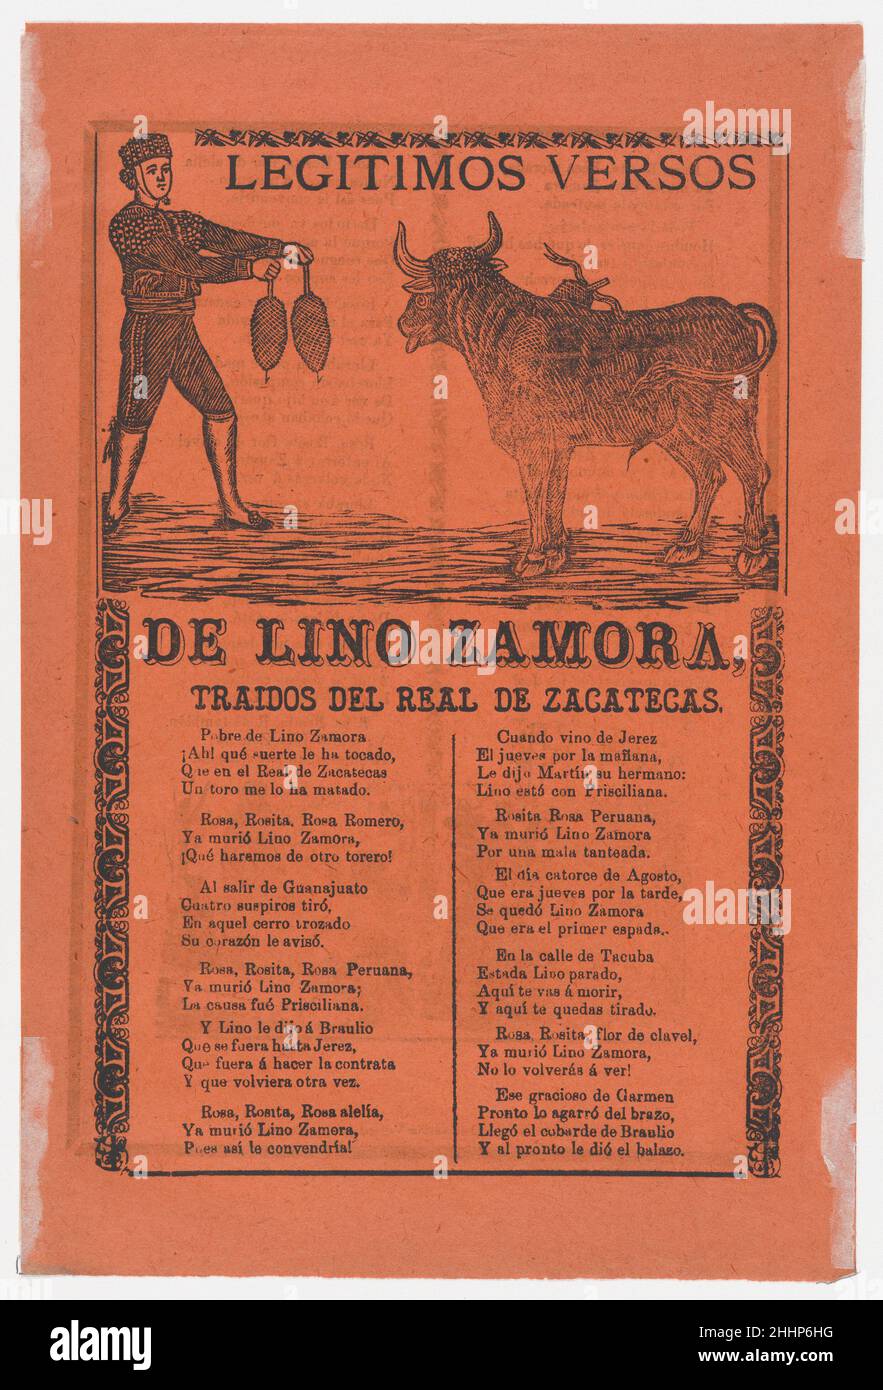 Broadside (recto) the legitimate verses of Lino Zamora brought from Real de Zacatecas (image of toreador and bull by Manilla) and a funeral scene on verso possibly by Posada 1902 (published) Manuel Manilla. Broadside (recto) the legitimate verses of Lino Zamora brought from Real de Zacatecas (image of toreador and bull by Manilla) and a funeral scene on verso possibly by Posada. Manuel Manilla (Mexican, Mexico City ca. 1830–1895 Mexico City). 1902 (published). Photo-relief, woodcut, wood engraving and letterpress on orange paper. Prints Stock Photo